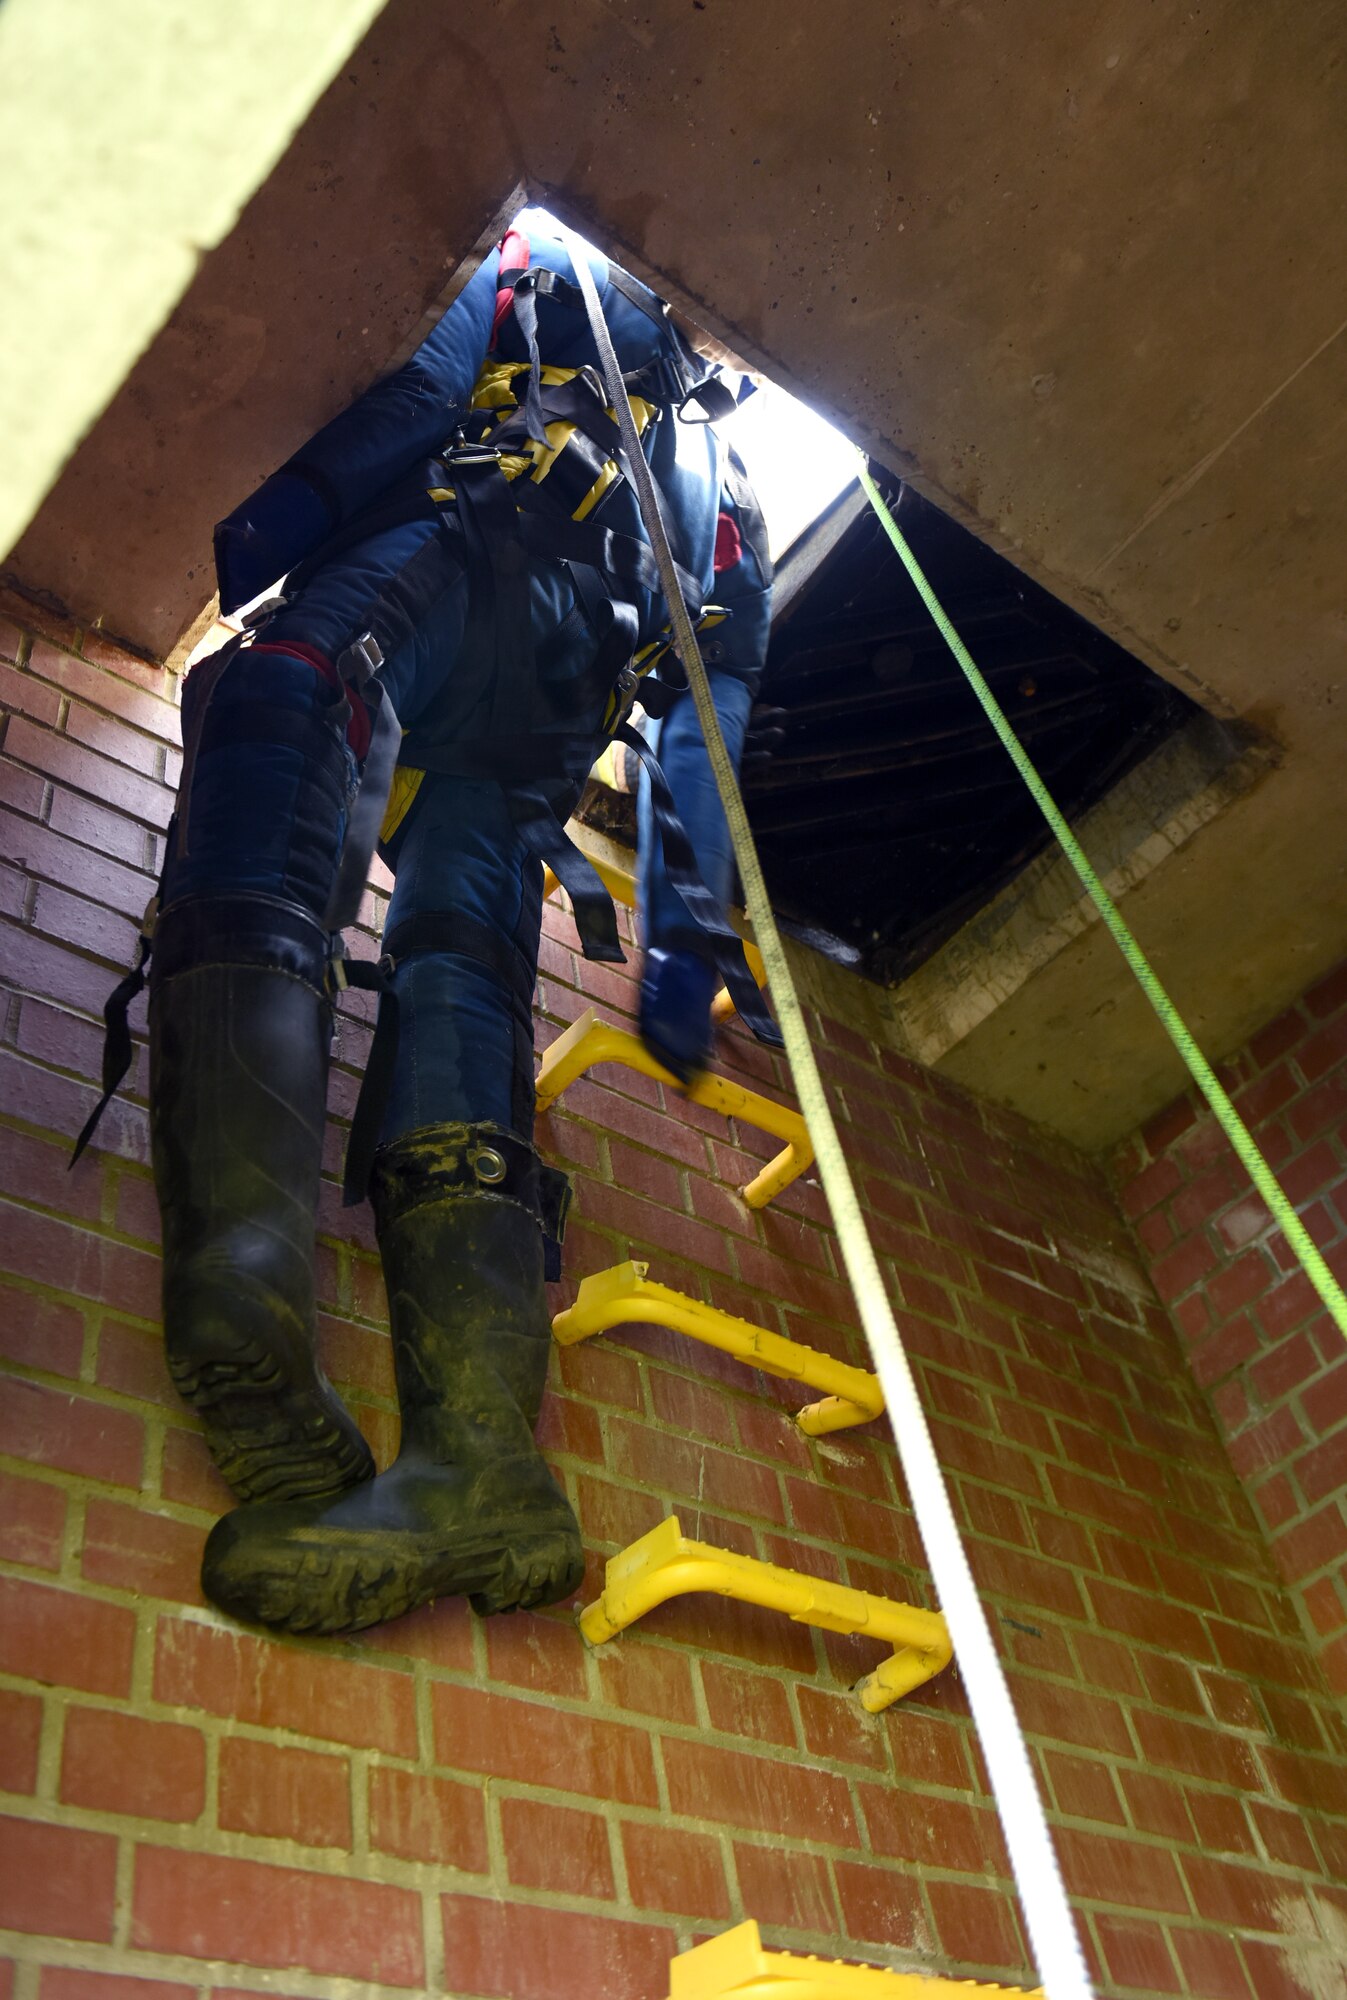 A simulated victim gets hoisted out of a confined space on belay and safety lines during confined space training conducted by the 100th Civil Engineer Squadron Fire Department at Royal Air Force Mildenhall, England, April 14, 2022. The fire department conducts a full confined-space drill at least four times a year for firefighters to meet training requirements. It’s vital for them to stay proficient with confined space and rescue to ensure they can successfully respond to real-world emergencies. (U.S. Air Force photo by Karen Abeyasekere)